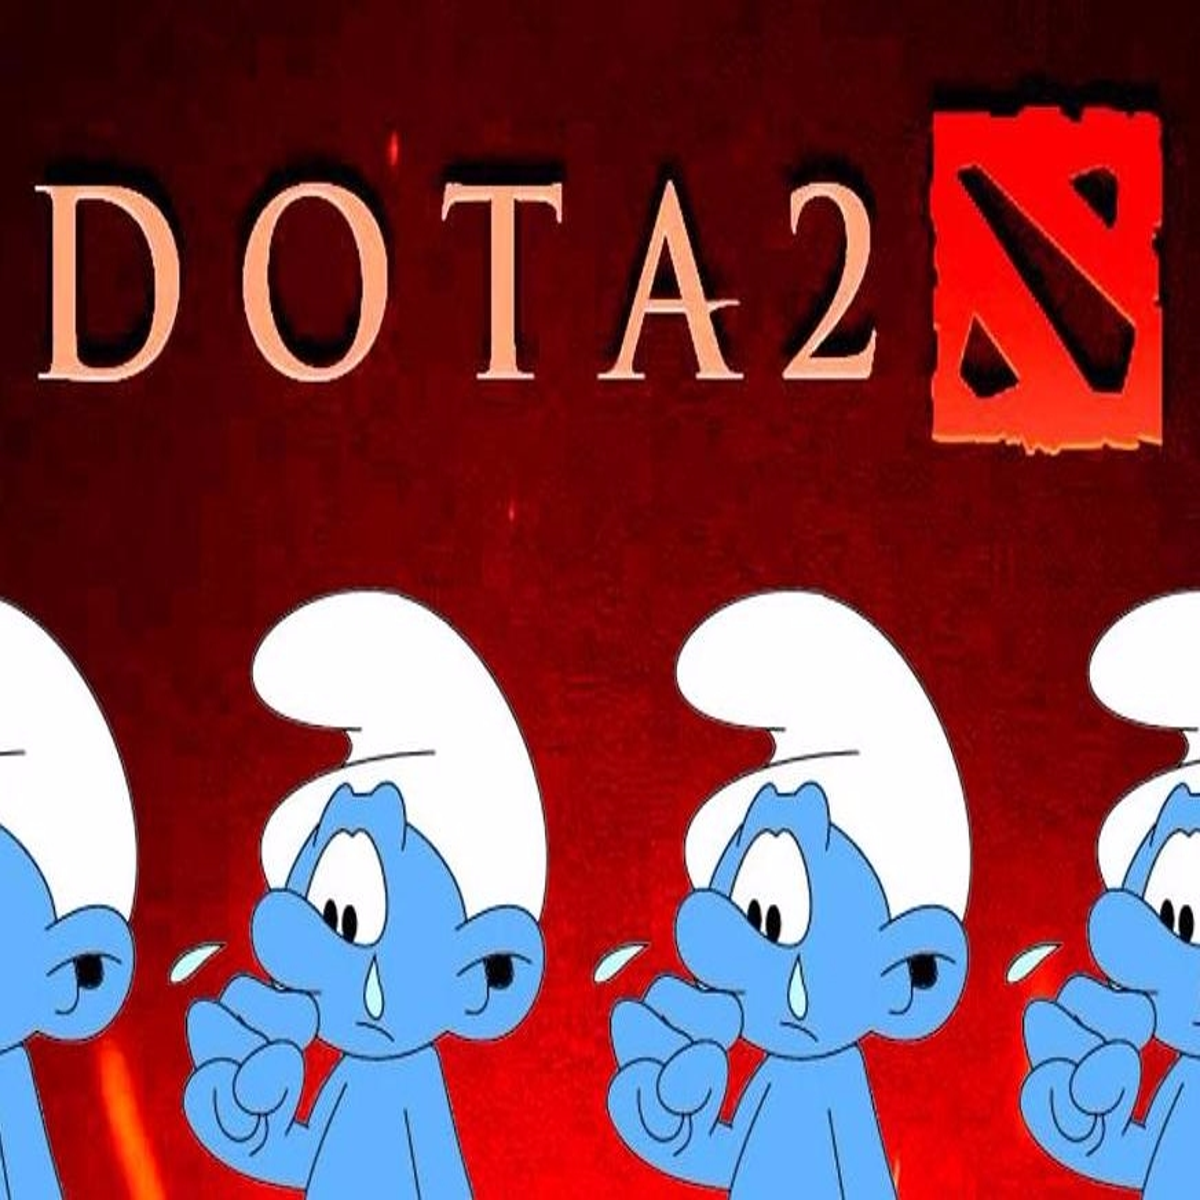 Smurfing is Not Welcome in Dota : r/DotA2